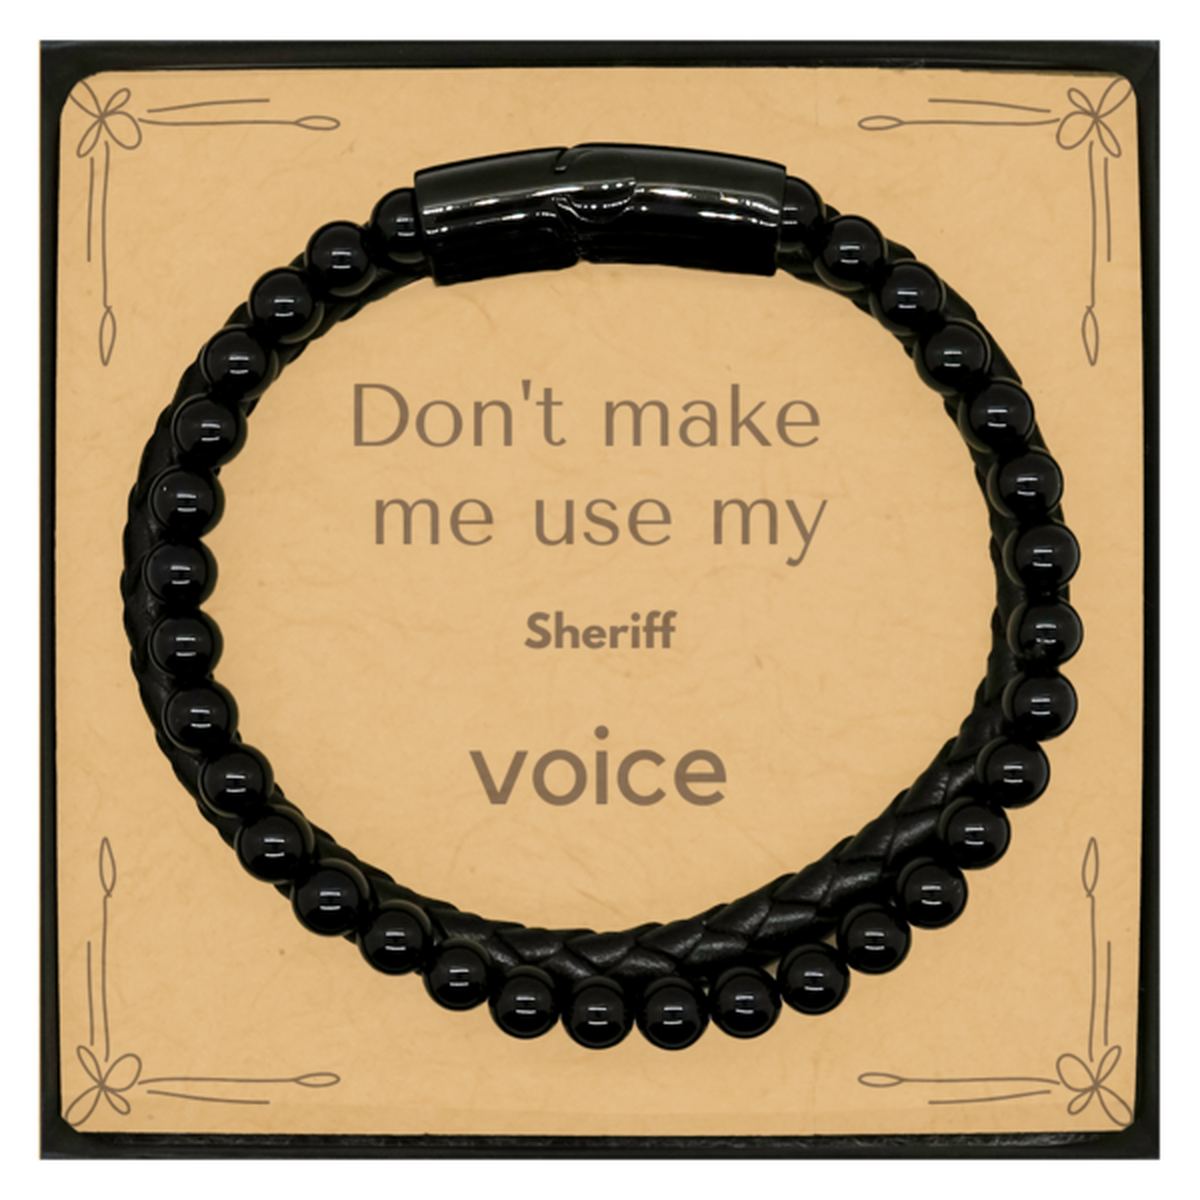 Don't make me use my Sheriff voice, Sarcasm Sheriff Card Gifts, Christmas Sheriff Stone Leather Bracelets Birthday Unique Gifts For Sheriff Coworkers, Men, Women, Colleague, Friends